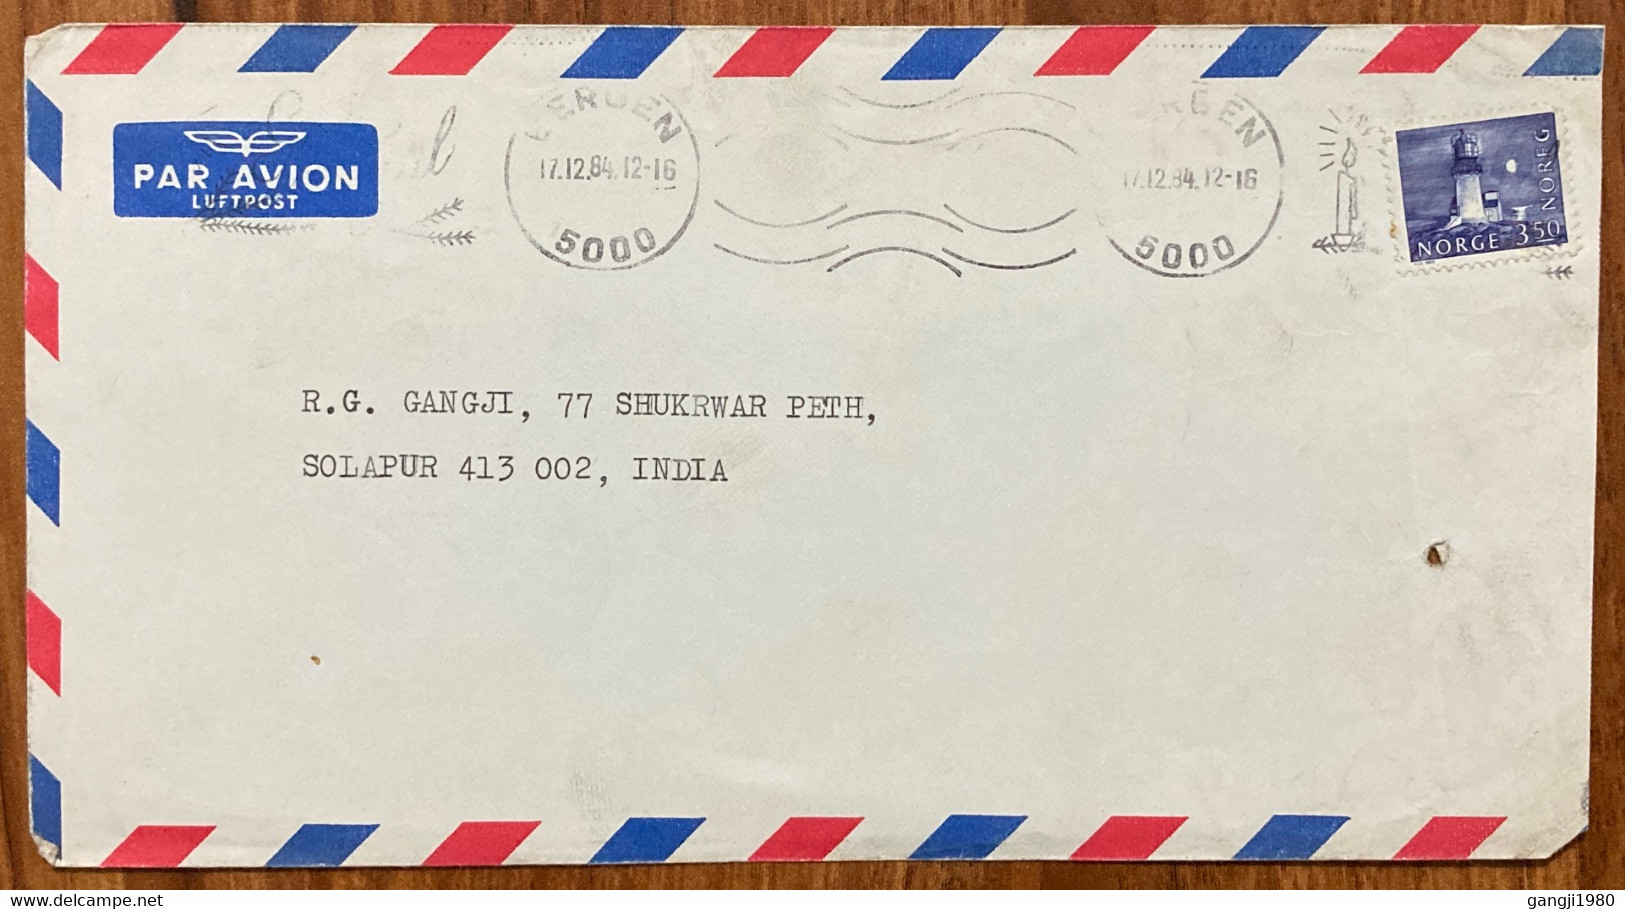 NORWAY,1984, AIR MAIL COVER TO INDIA, BERGEN CITY, CANDLE PICTURE, ROLLAR WAVY CANCELLATION, LIGHT HOUSE STAMP. - Briefe U. Dokumente